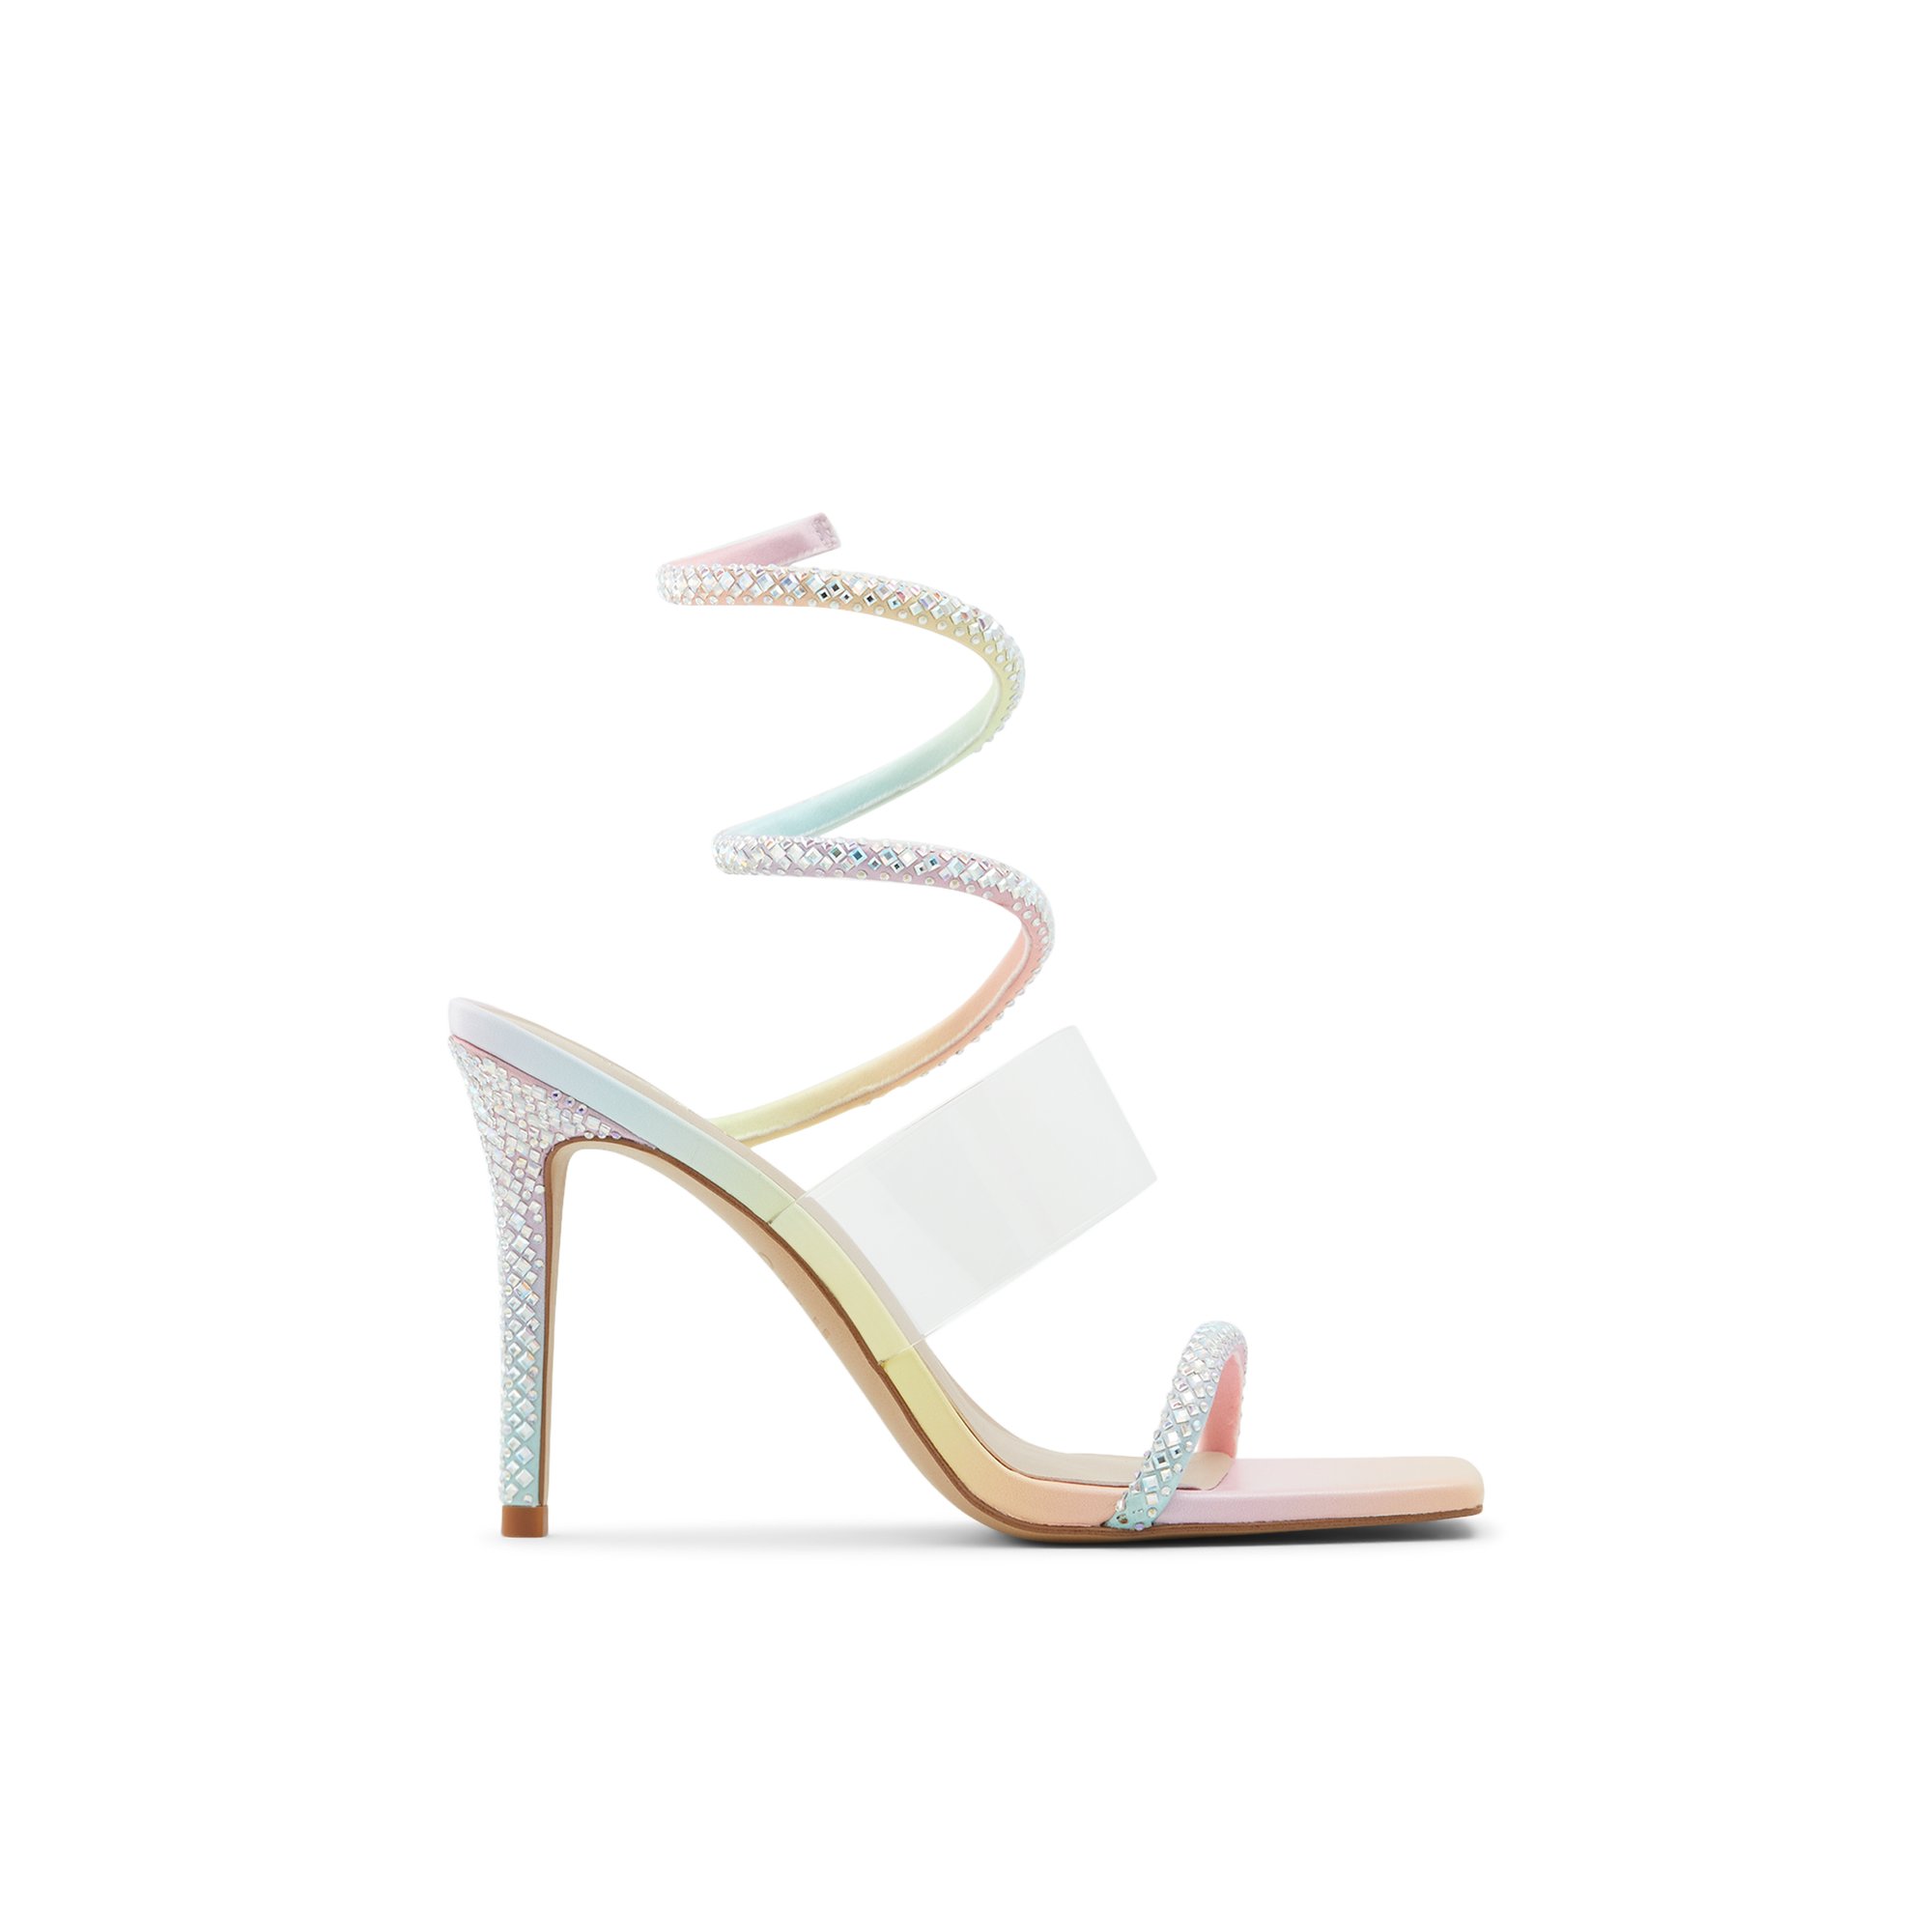 Image of ALDO Selima - Women's Special Occasion Collection - Pastel, Size 8.5